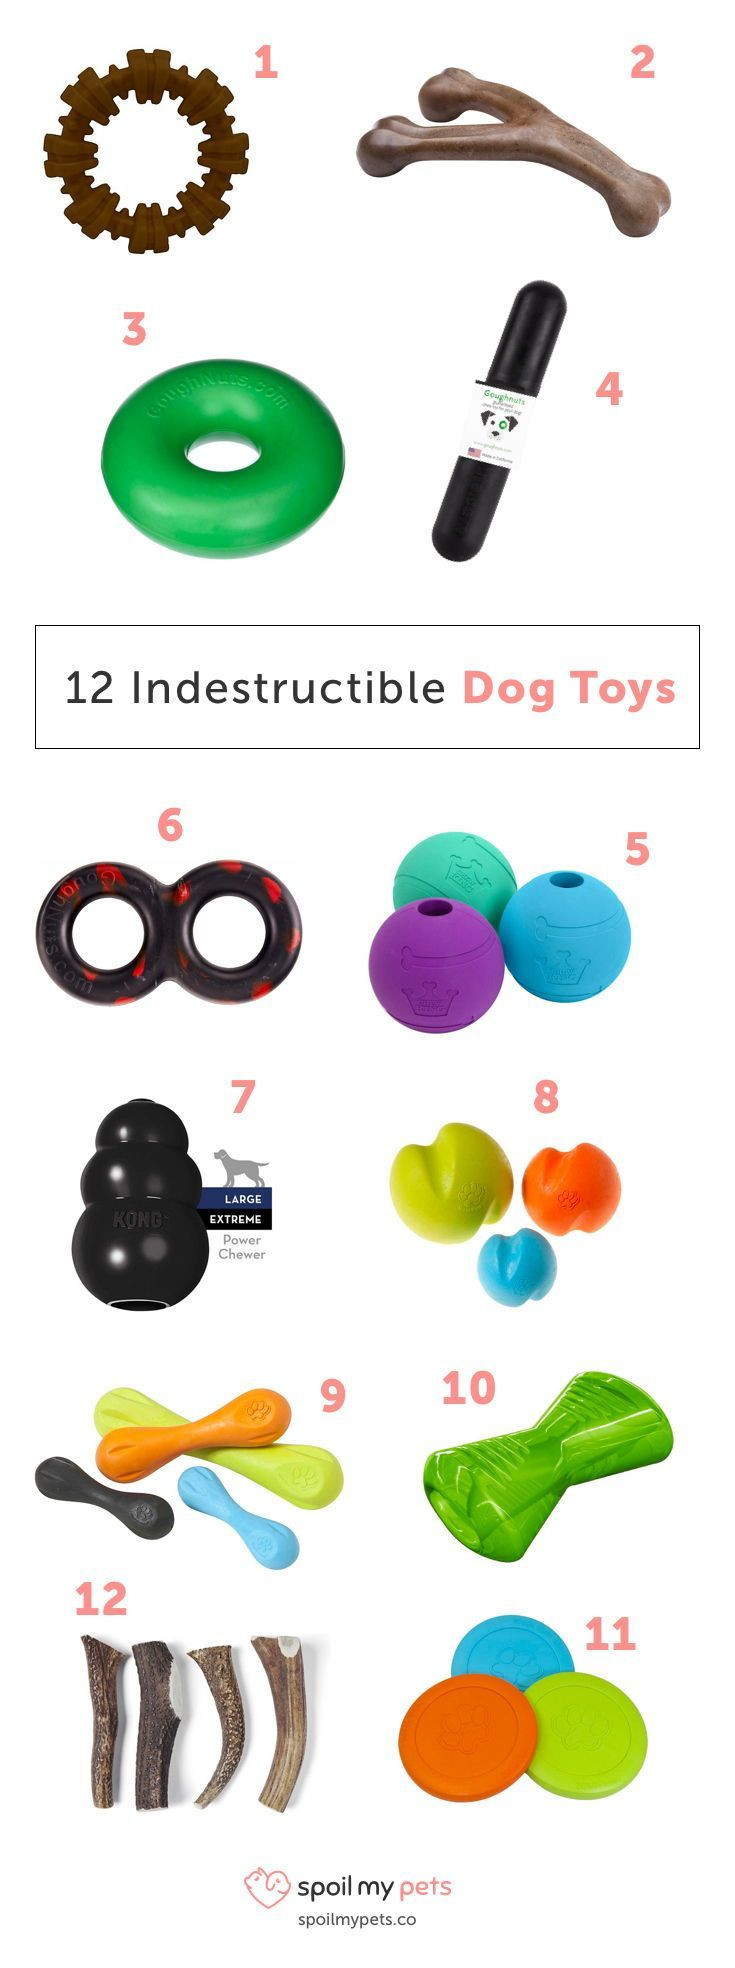 DIY Indestructible Dog Toy
 12 Most Indestructible Dog Toys Your Dog Will Love